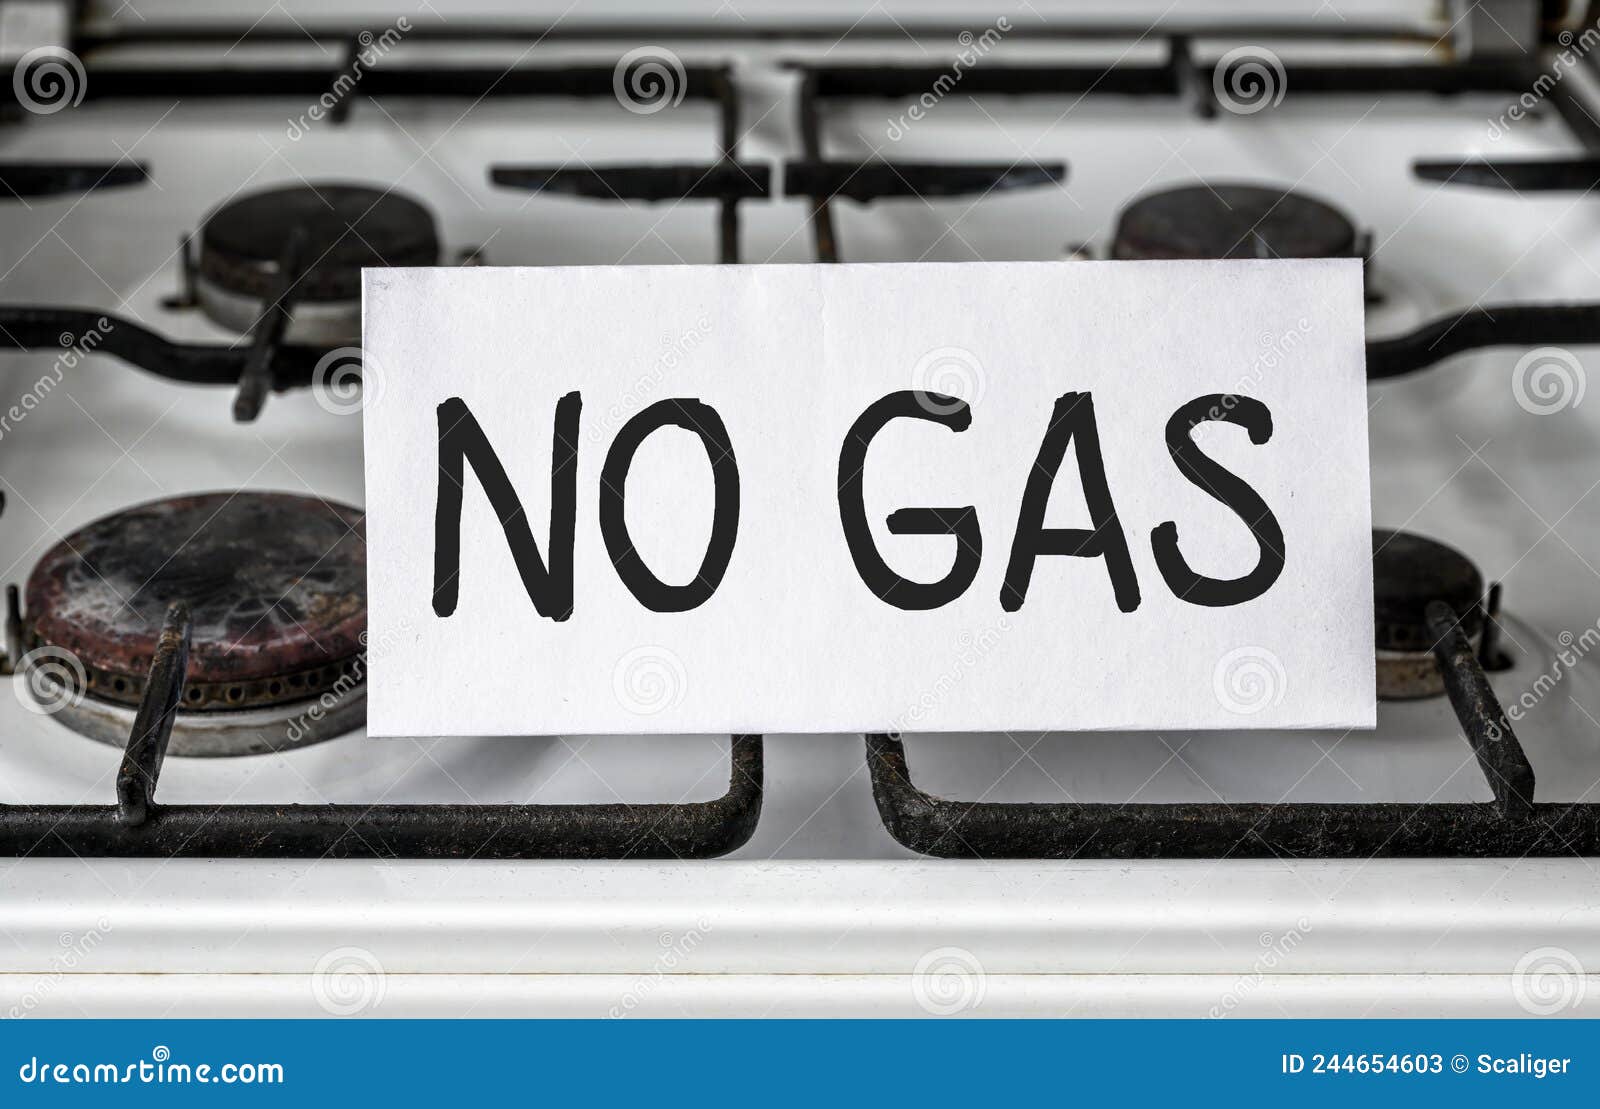 gas-stove-with-note-no-gas-not-working-at-home-stock-image-image-of